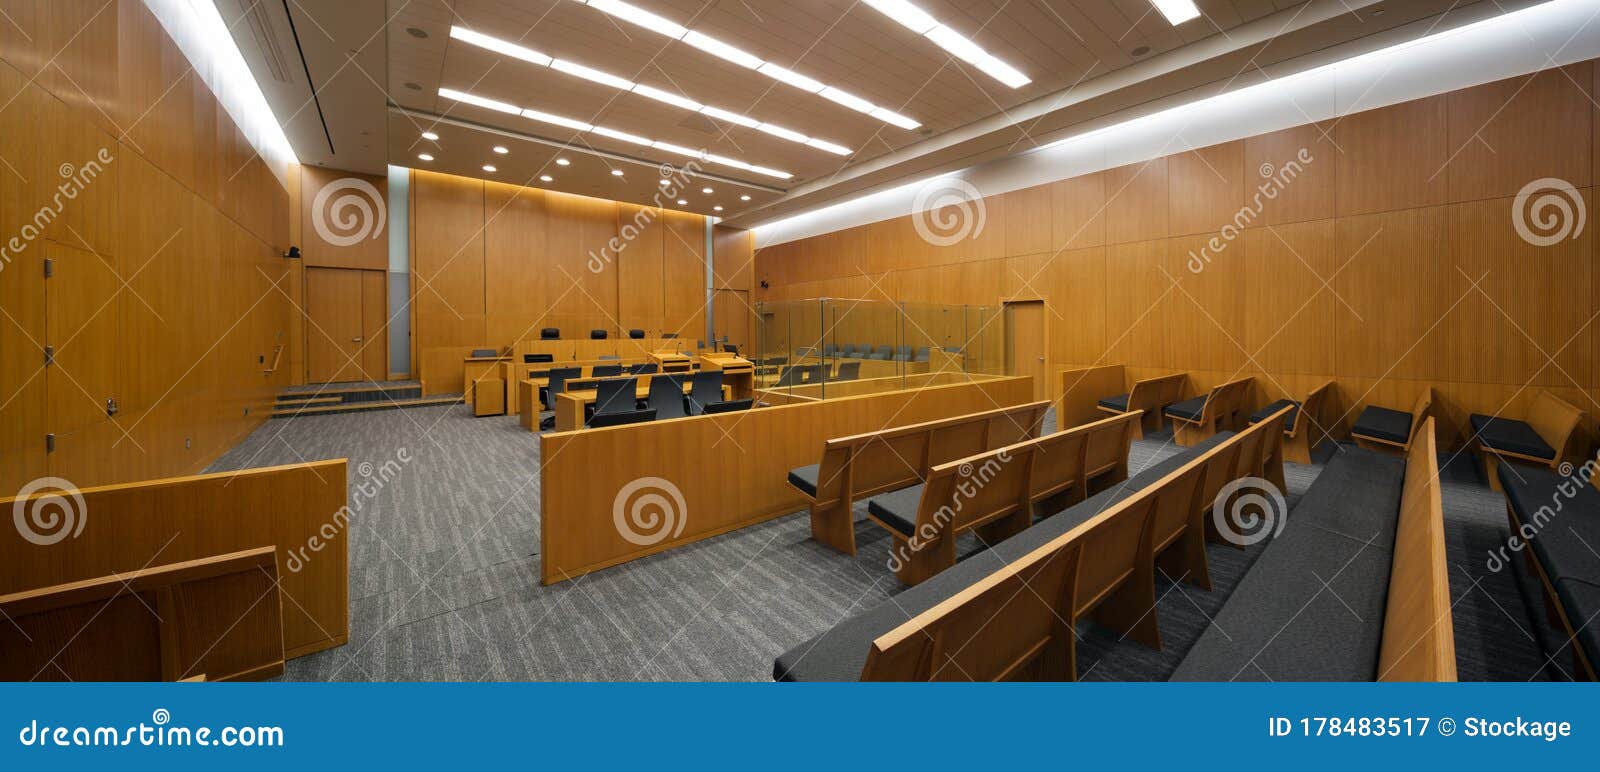 new courtroom